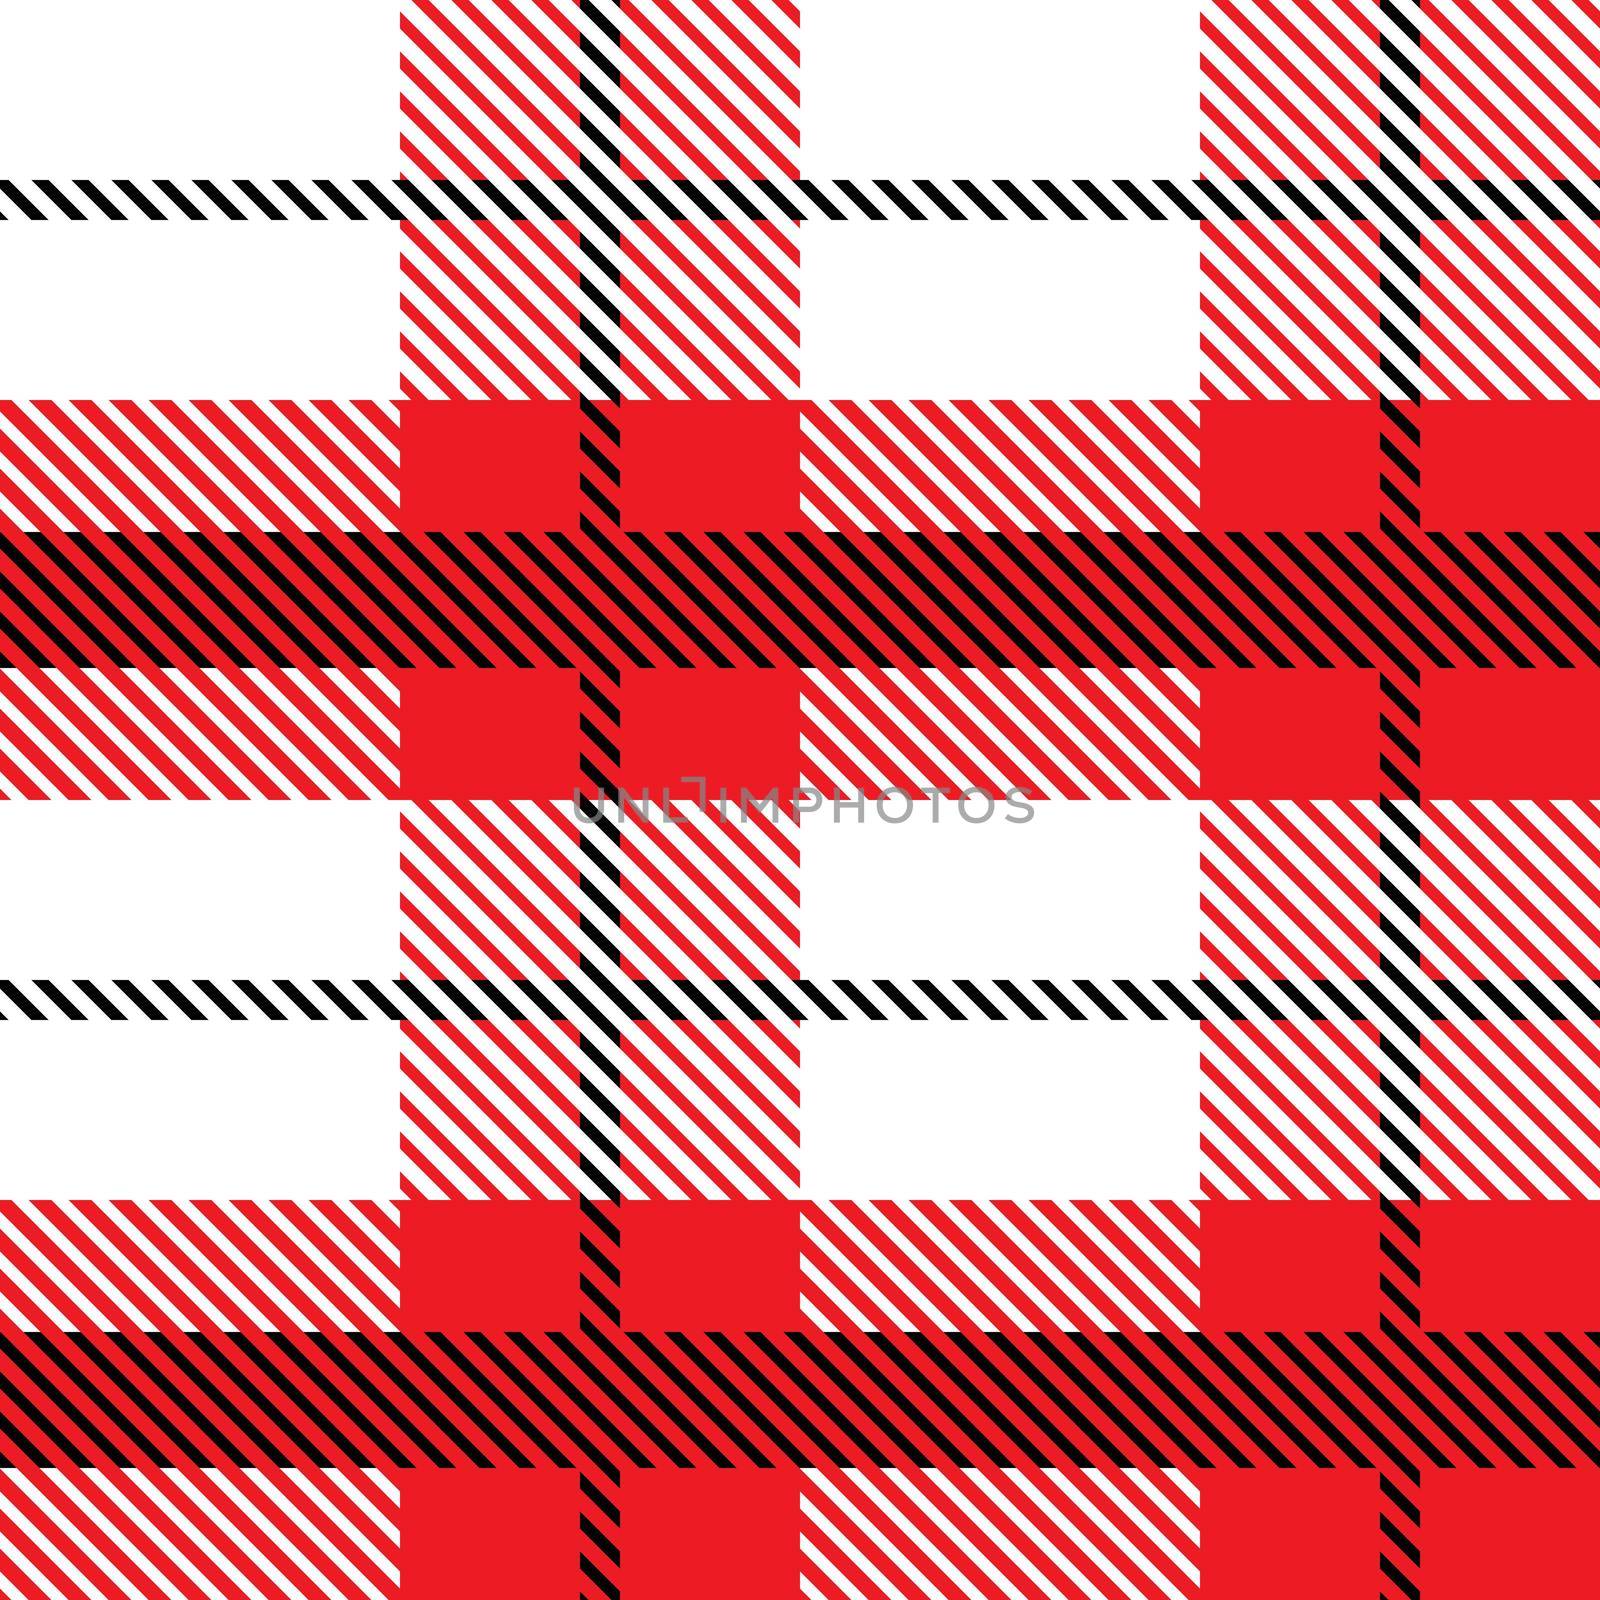 Red and black Scotland textile seamless pattern. Fabric texture check tartan plaid. Abstract geometric background for cloth, card, fabric. Monochrome repeating design. Modern squared ornament by allaku